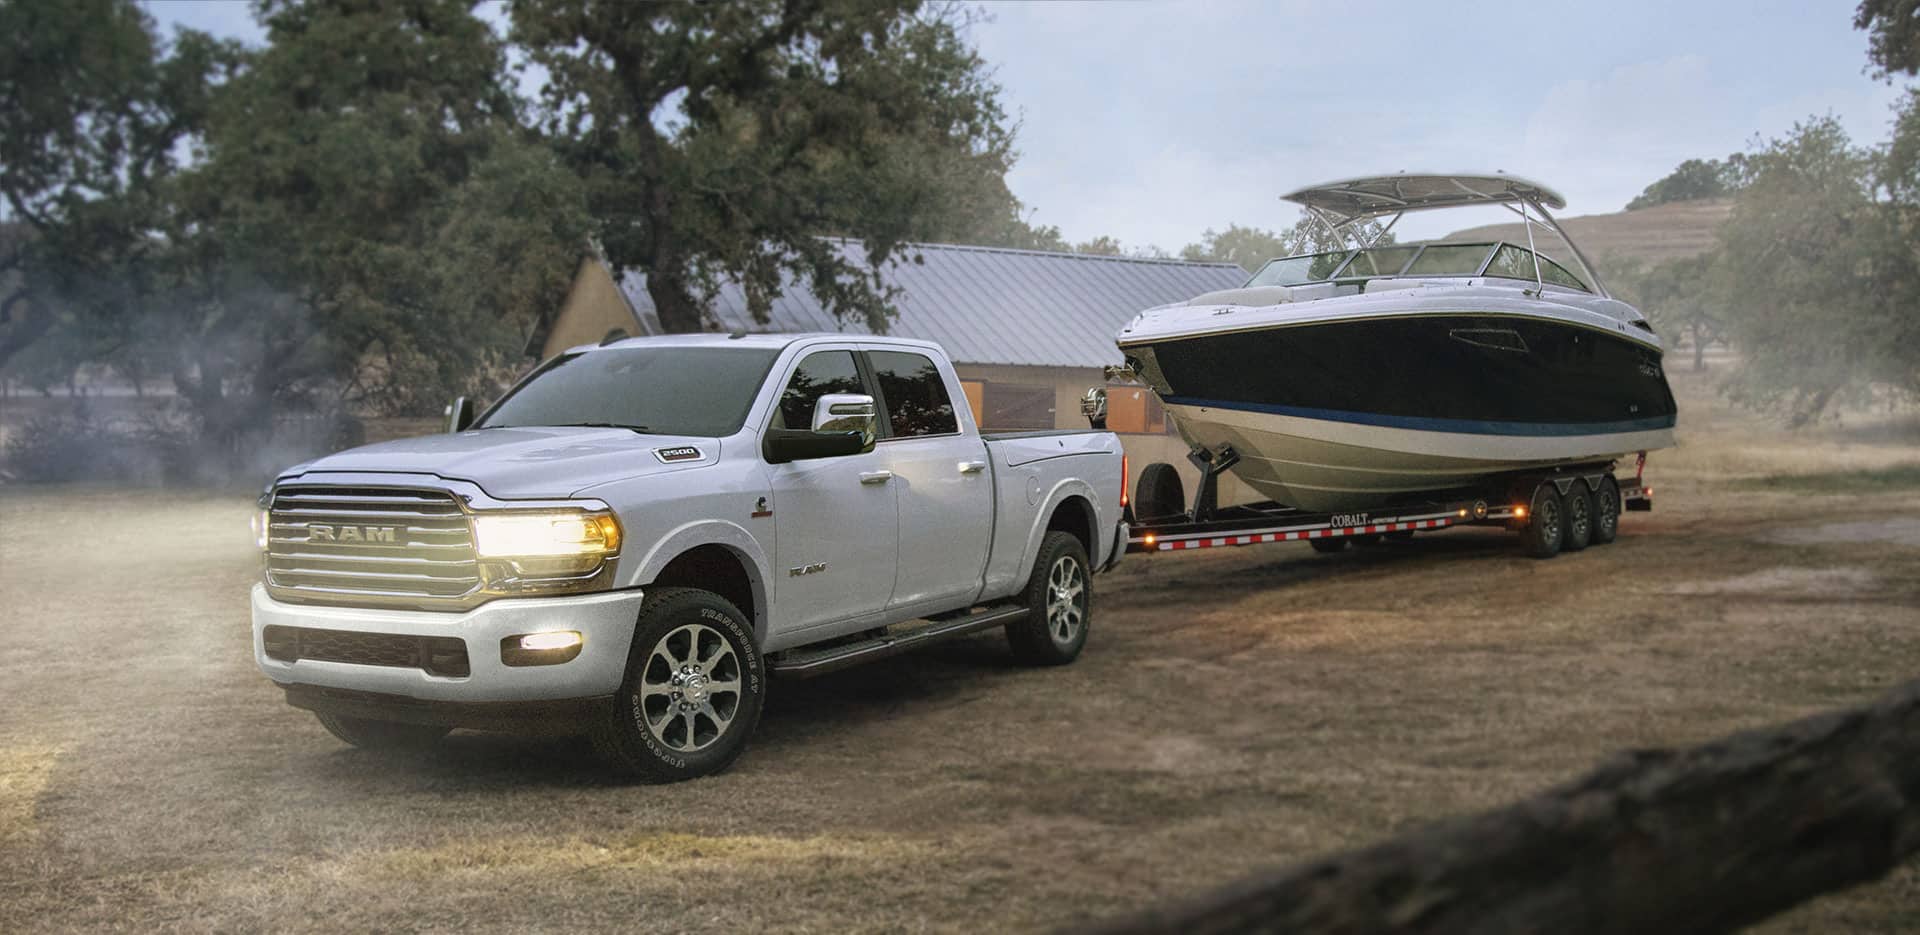 White RAM 2500 towing a motor boat at a campground